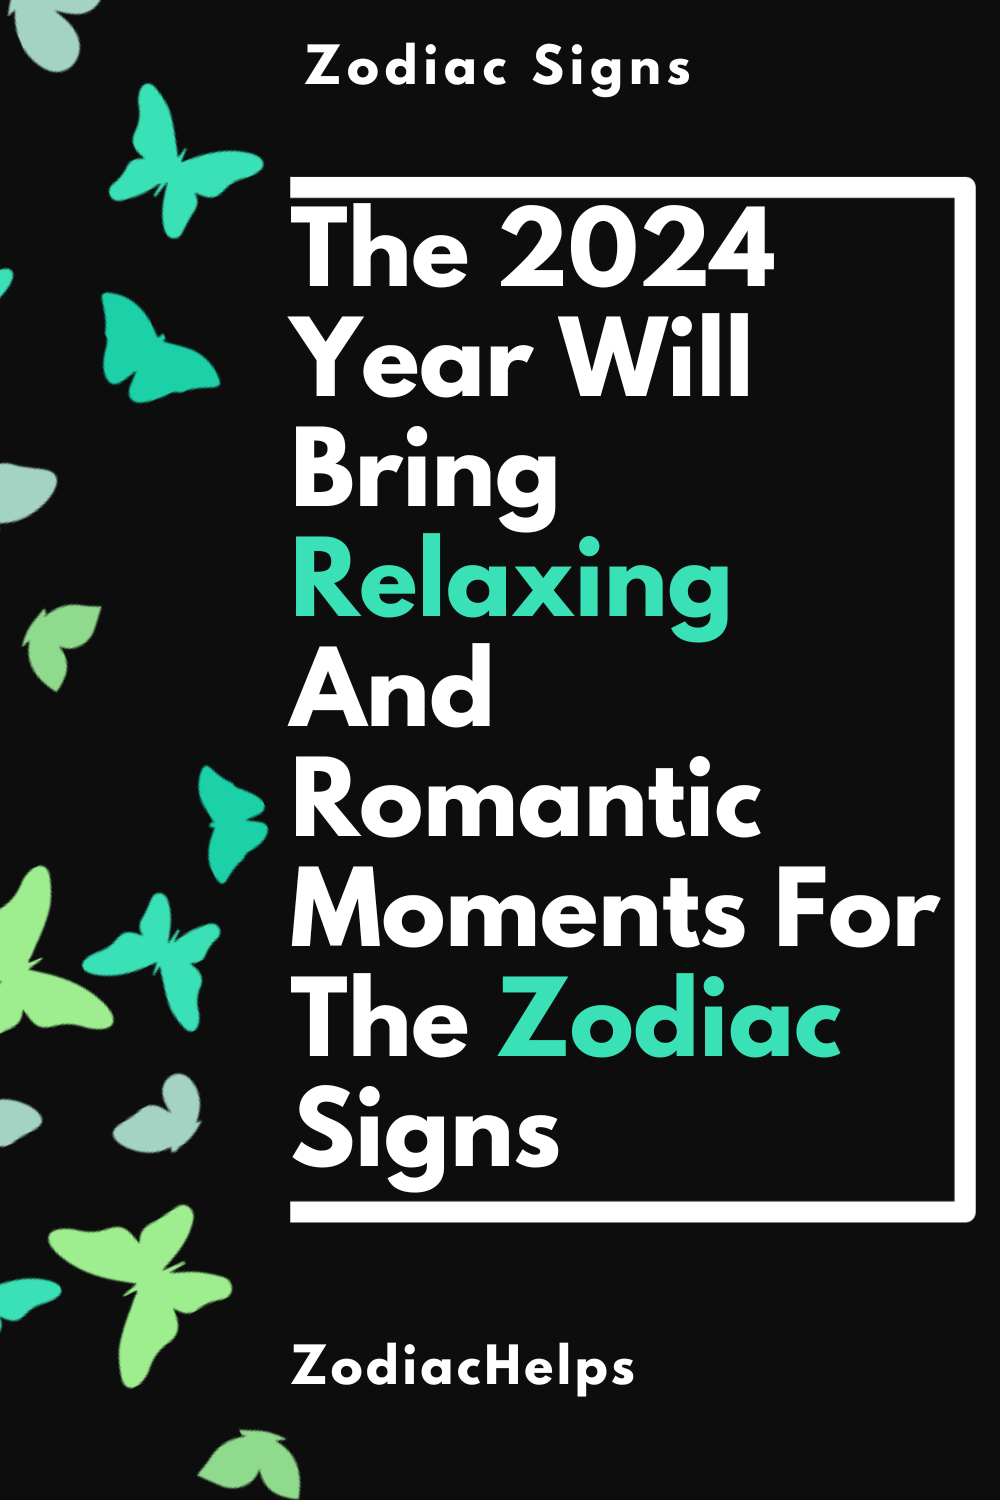 The 2024 Year Will Bring Relaxing And Romantic Moments For The Zodiac Signs